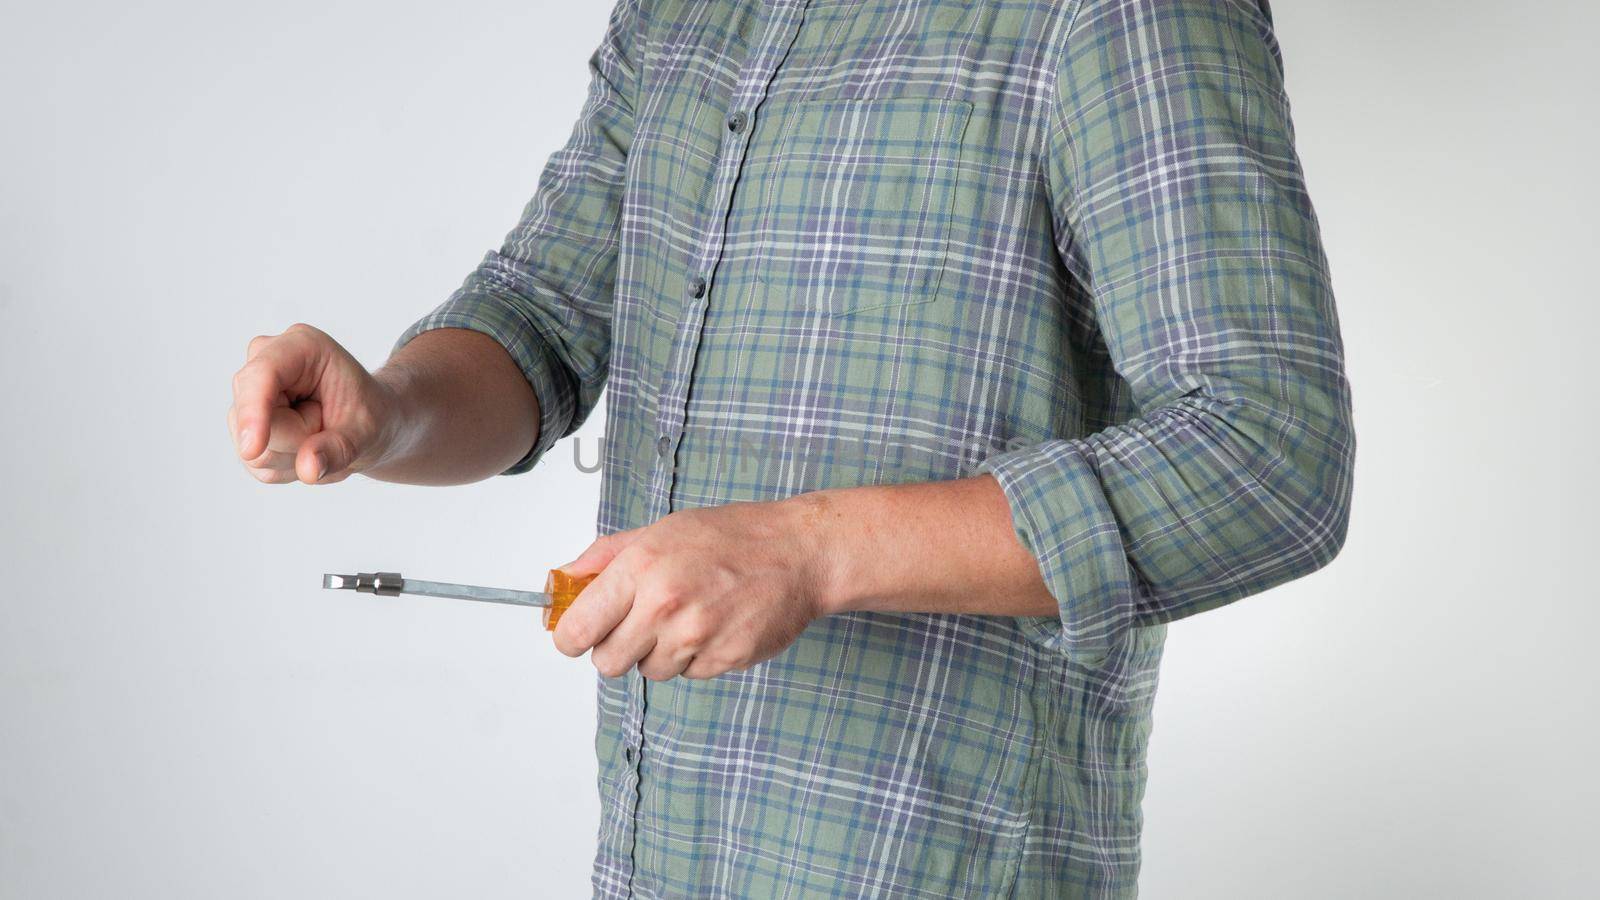 A man holds a screwdriver in his hand on a white background. High quality photo